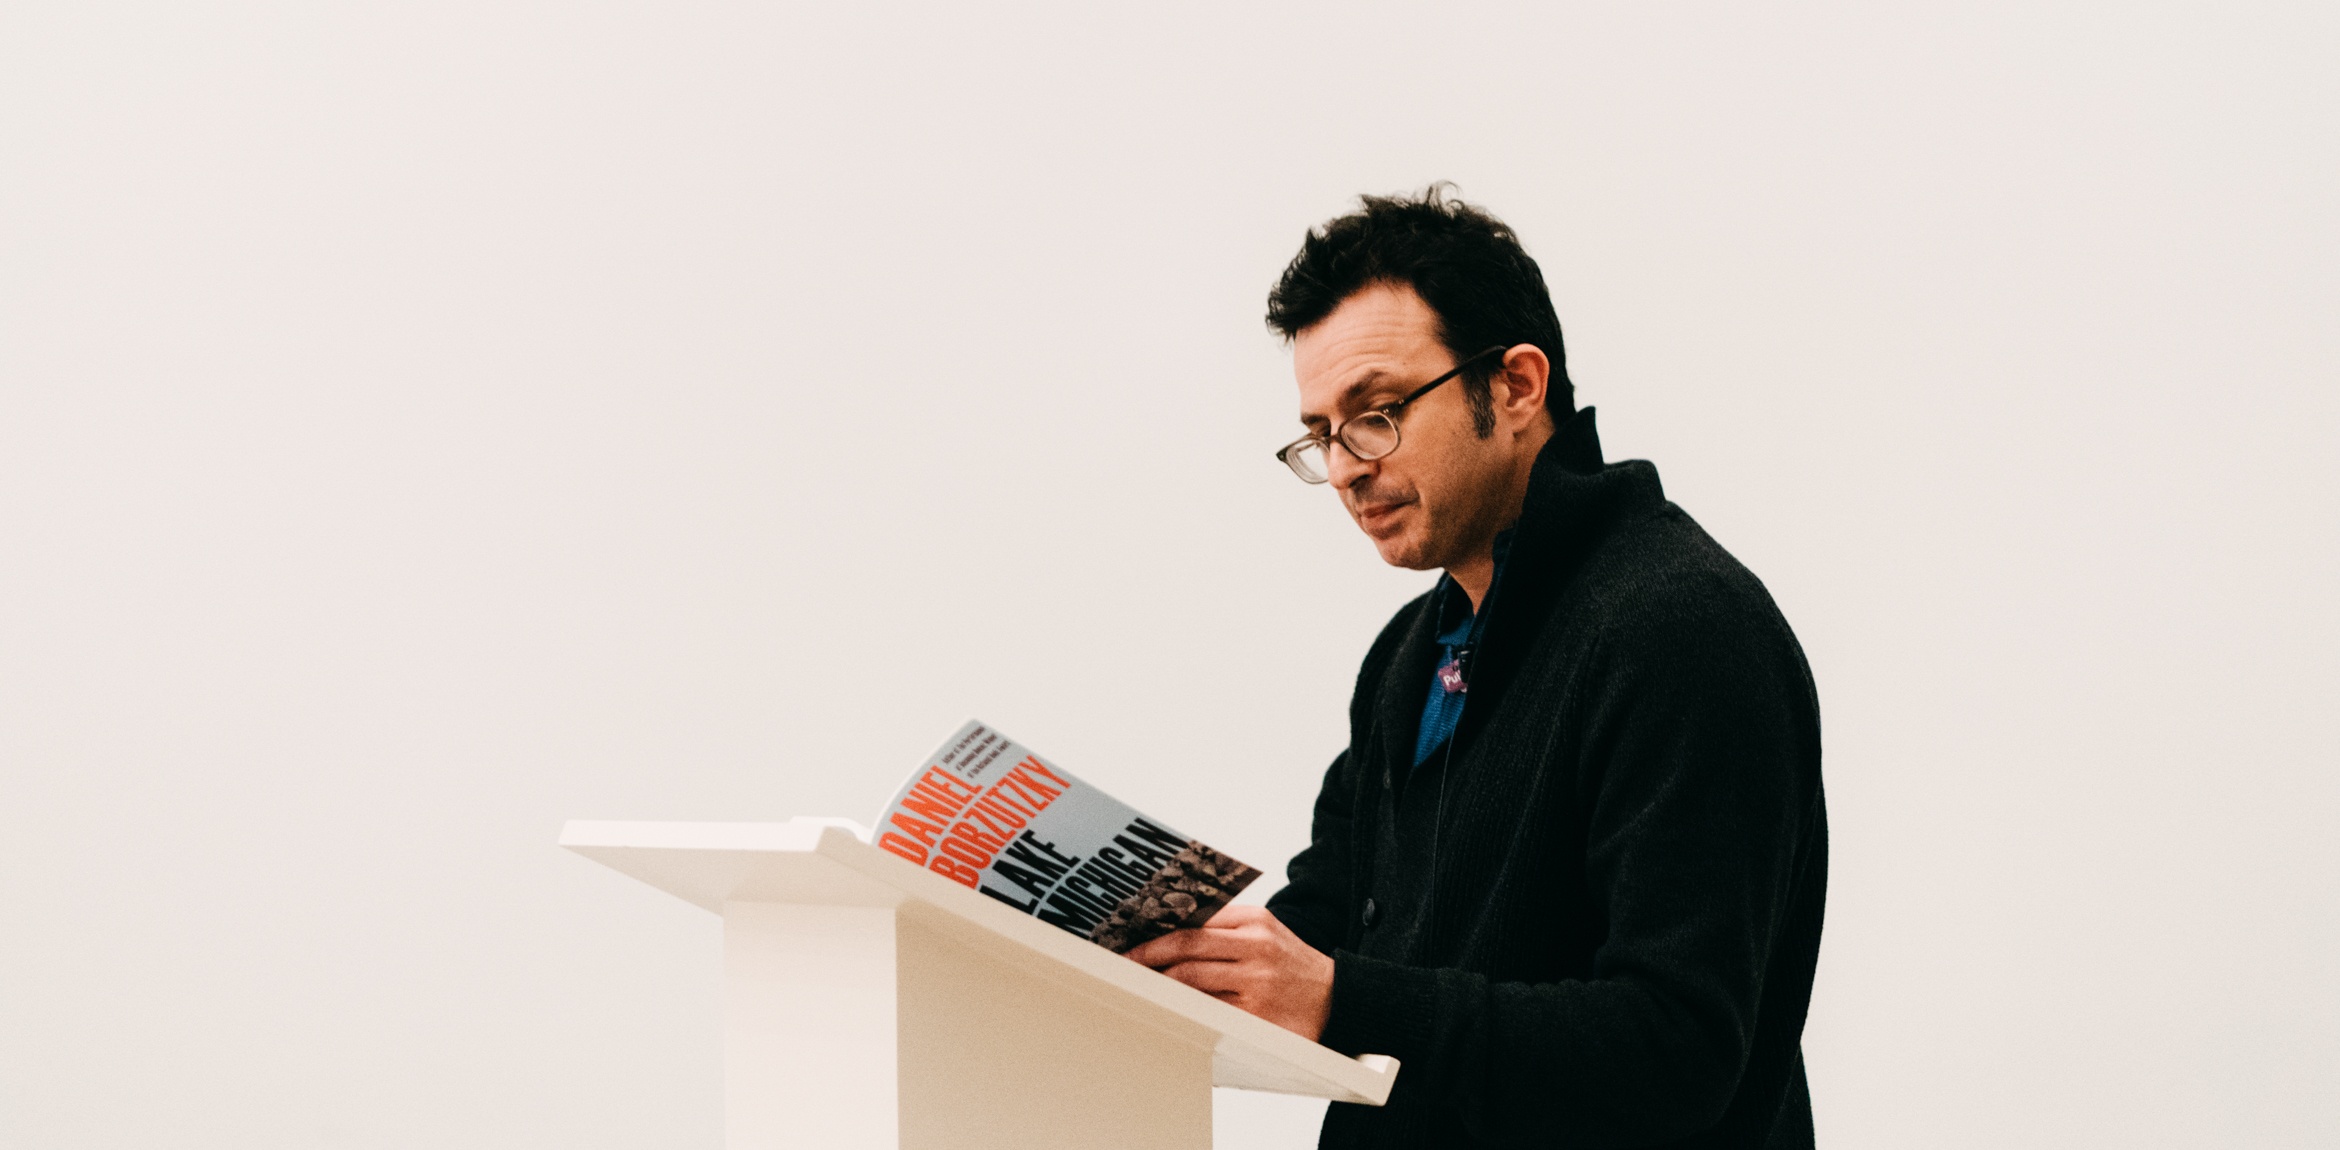 Poet Daniel Borzutzky reads from his collection at a white podium.